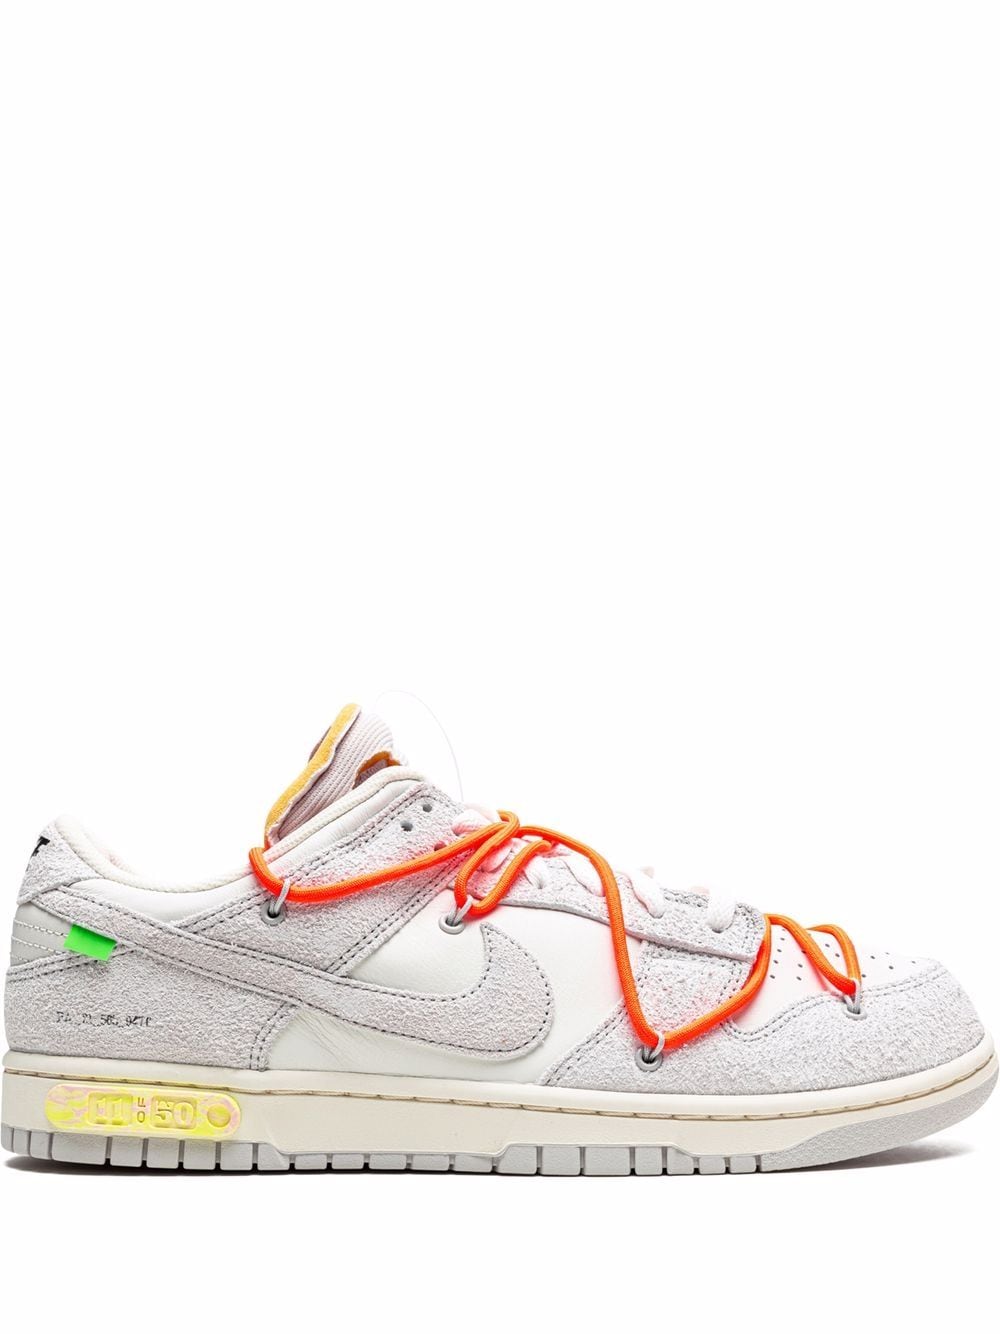 Image 1 of Nike X Off-White "x Off-White Dunk Low ""Lot 11 of 50"" sneakers"